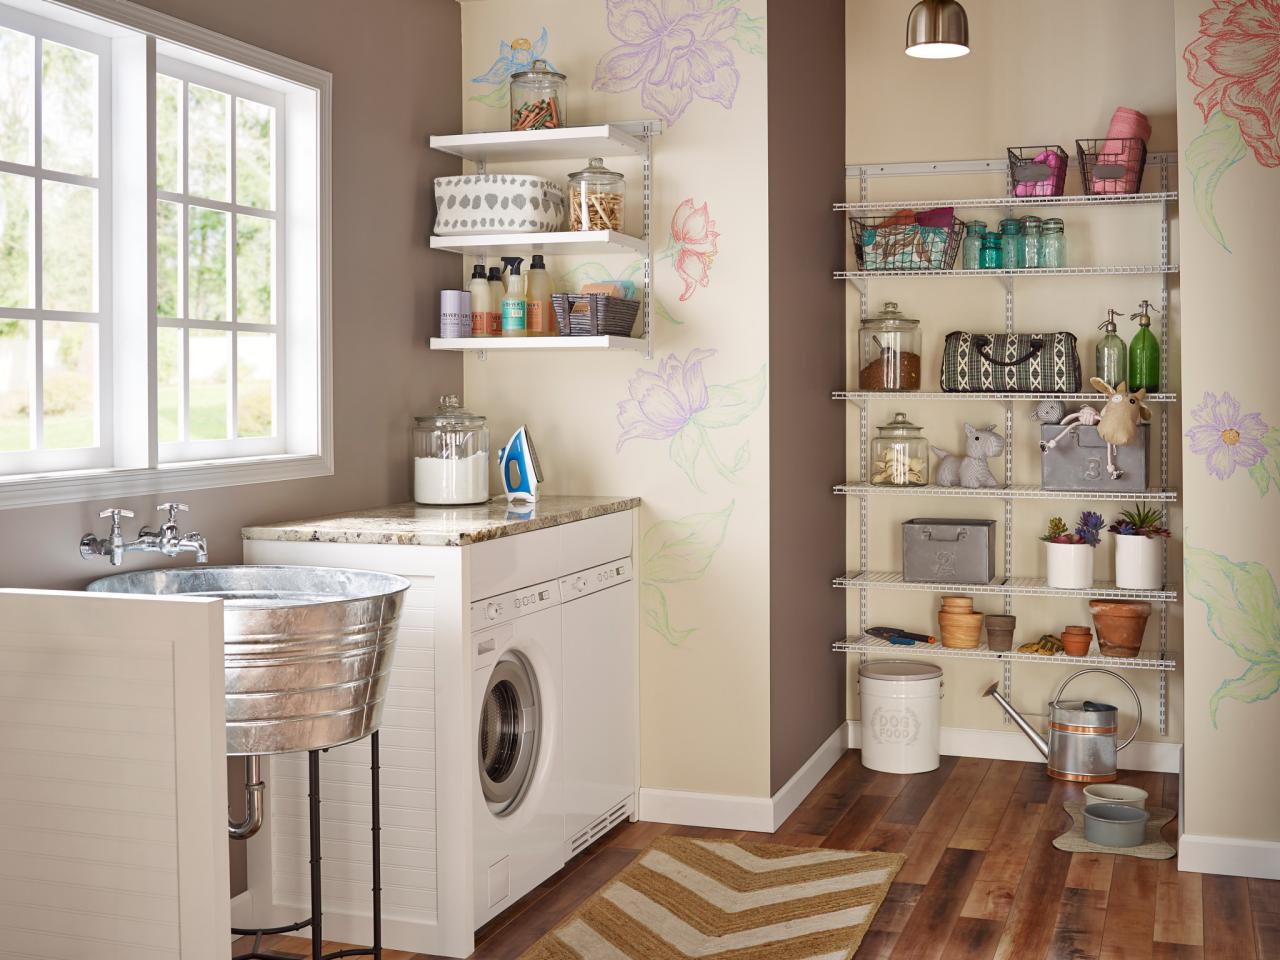 10 Clever Storage Ideas for Your Tiny Laundry Room HGTV's Decorating